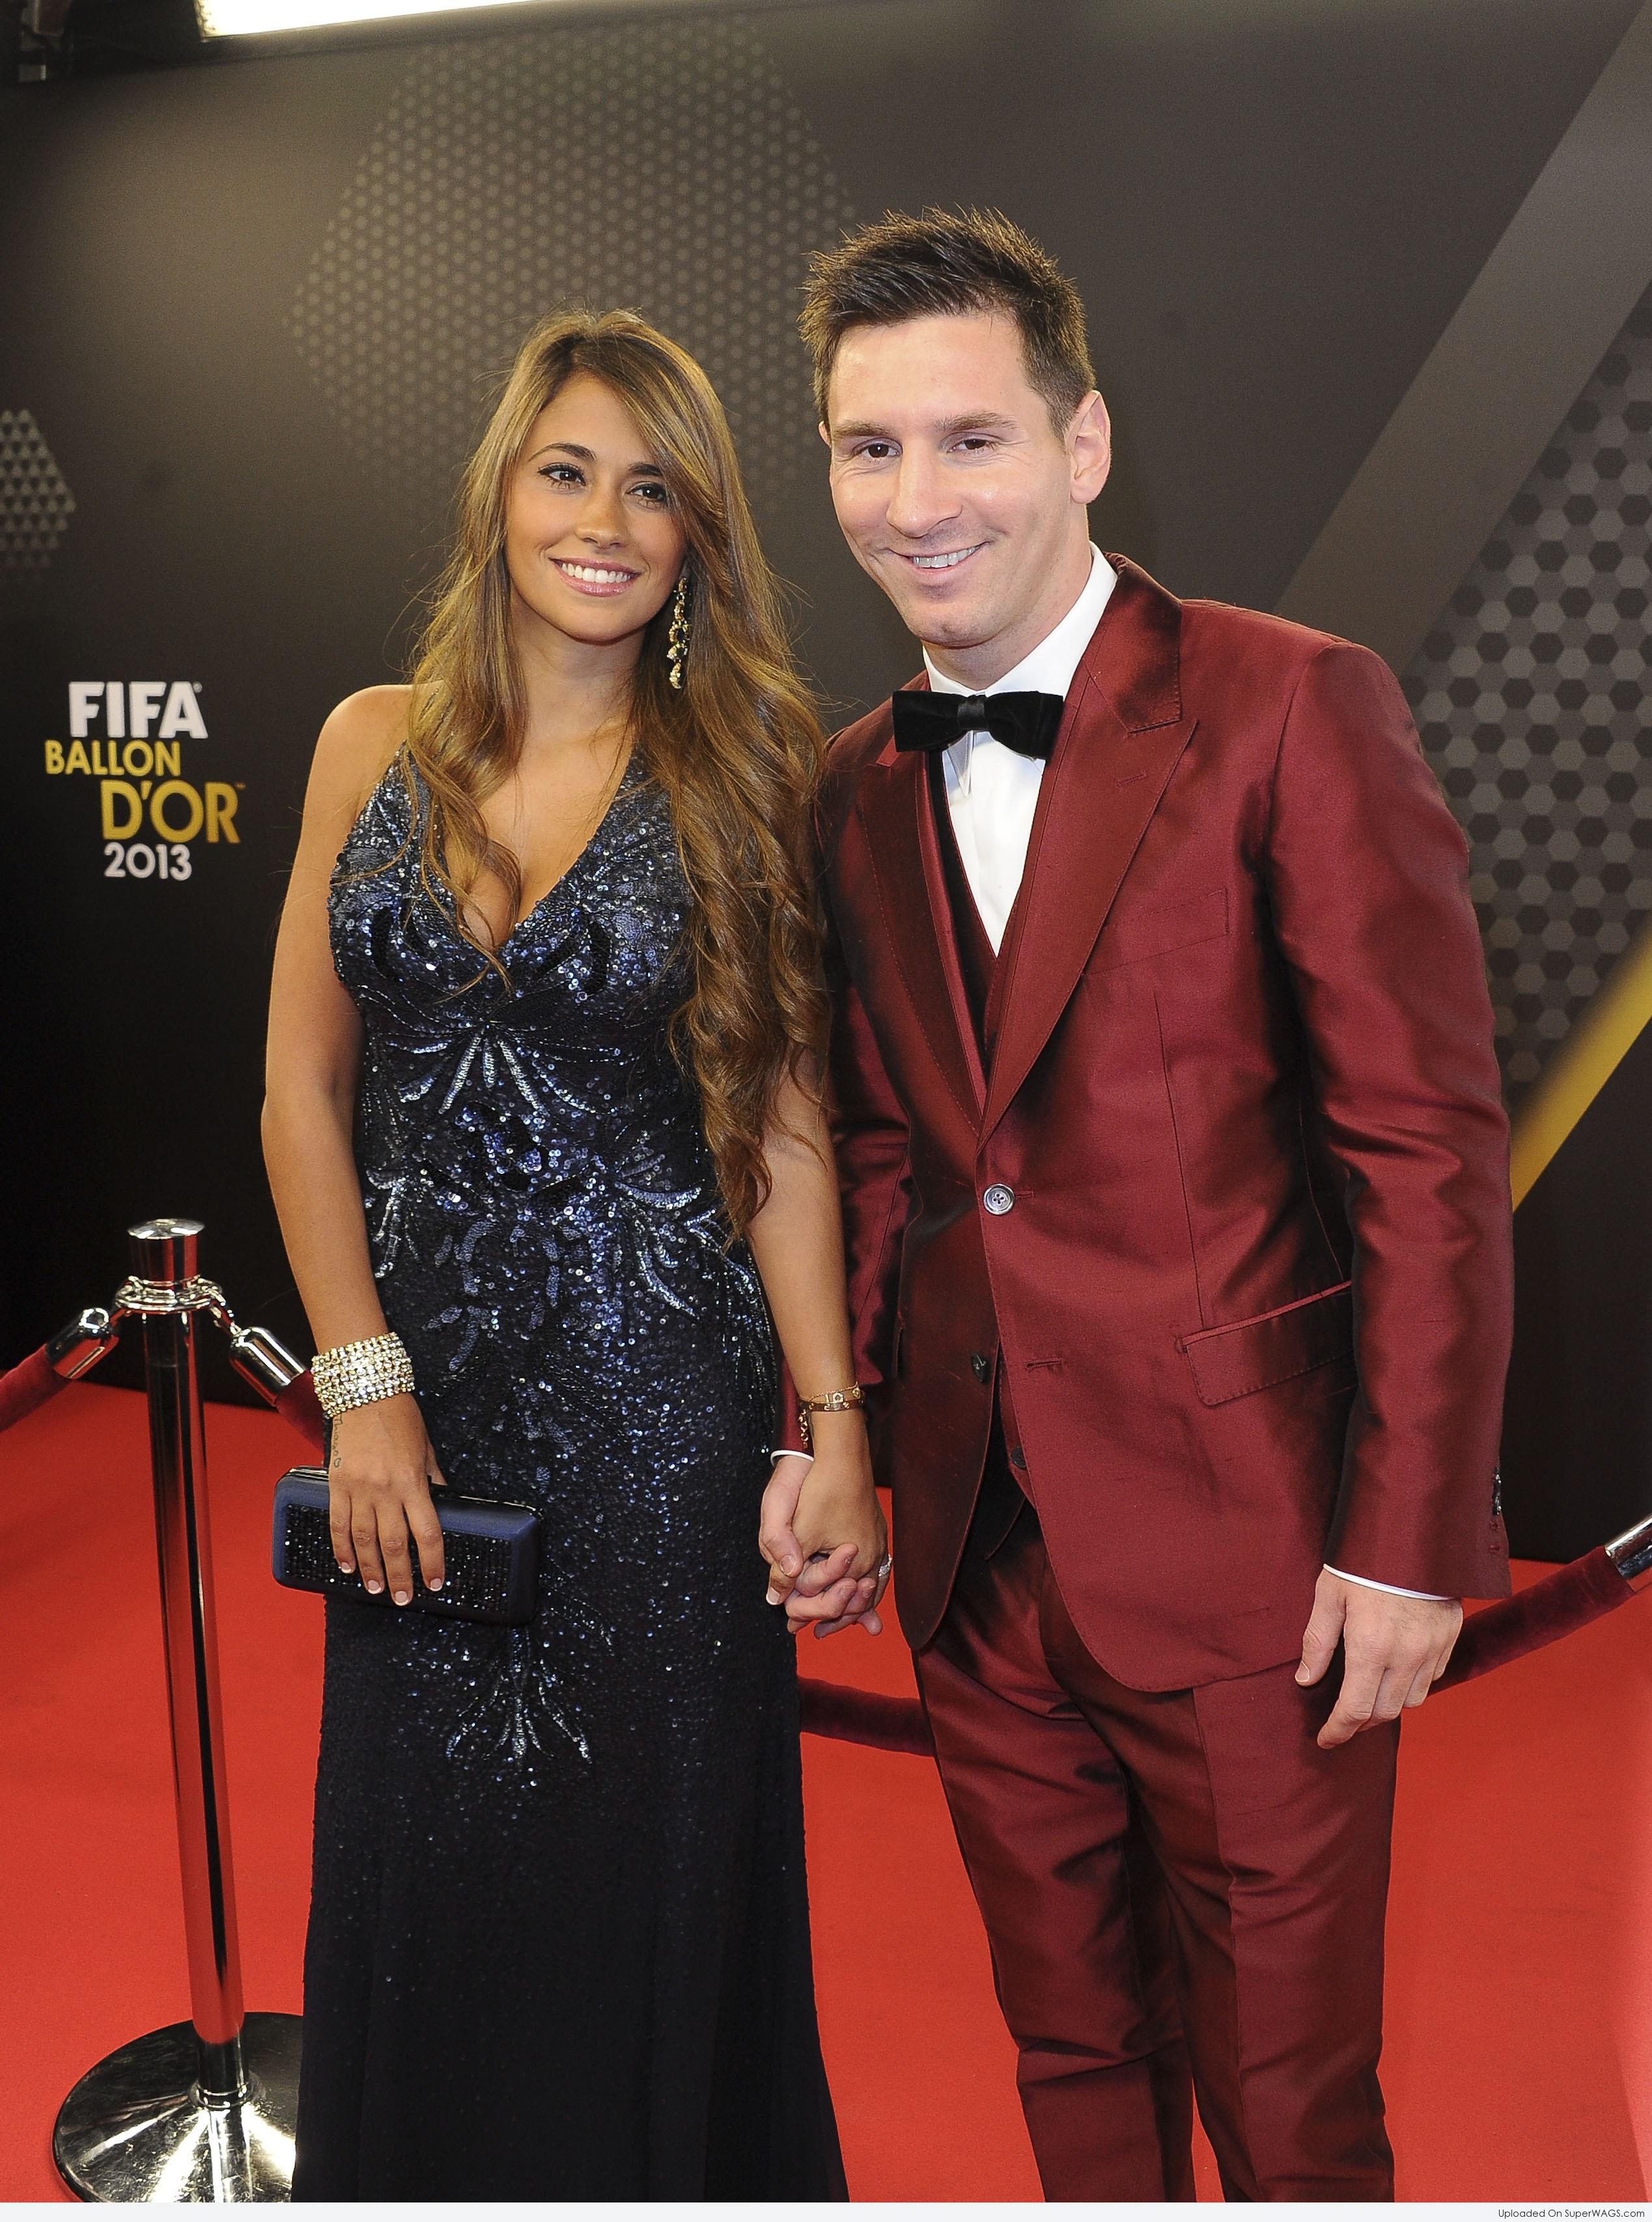 Lionel Messi And Antonella Roccuzzo At Party Super Wags Hottest Wives And Girlfriends Of